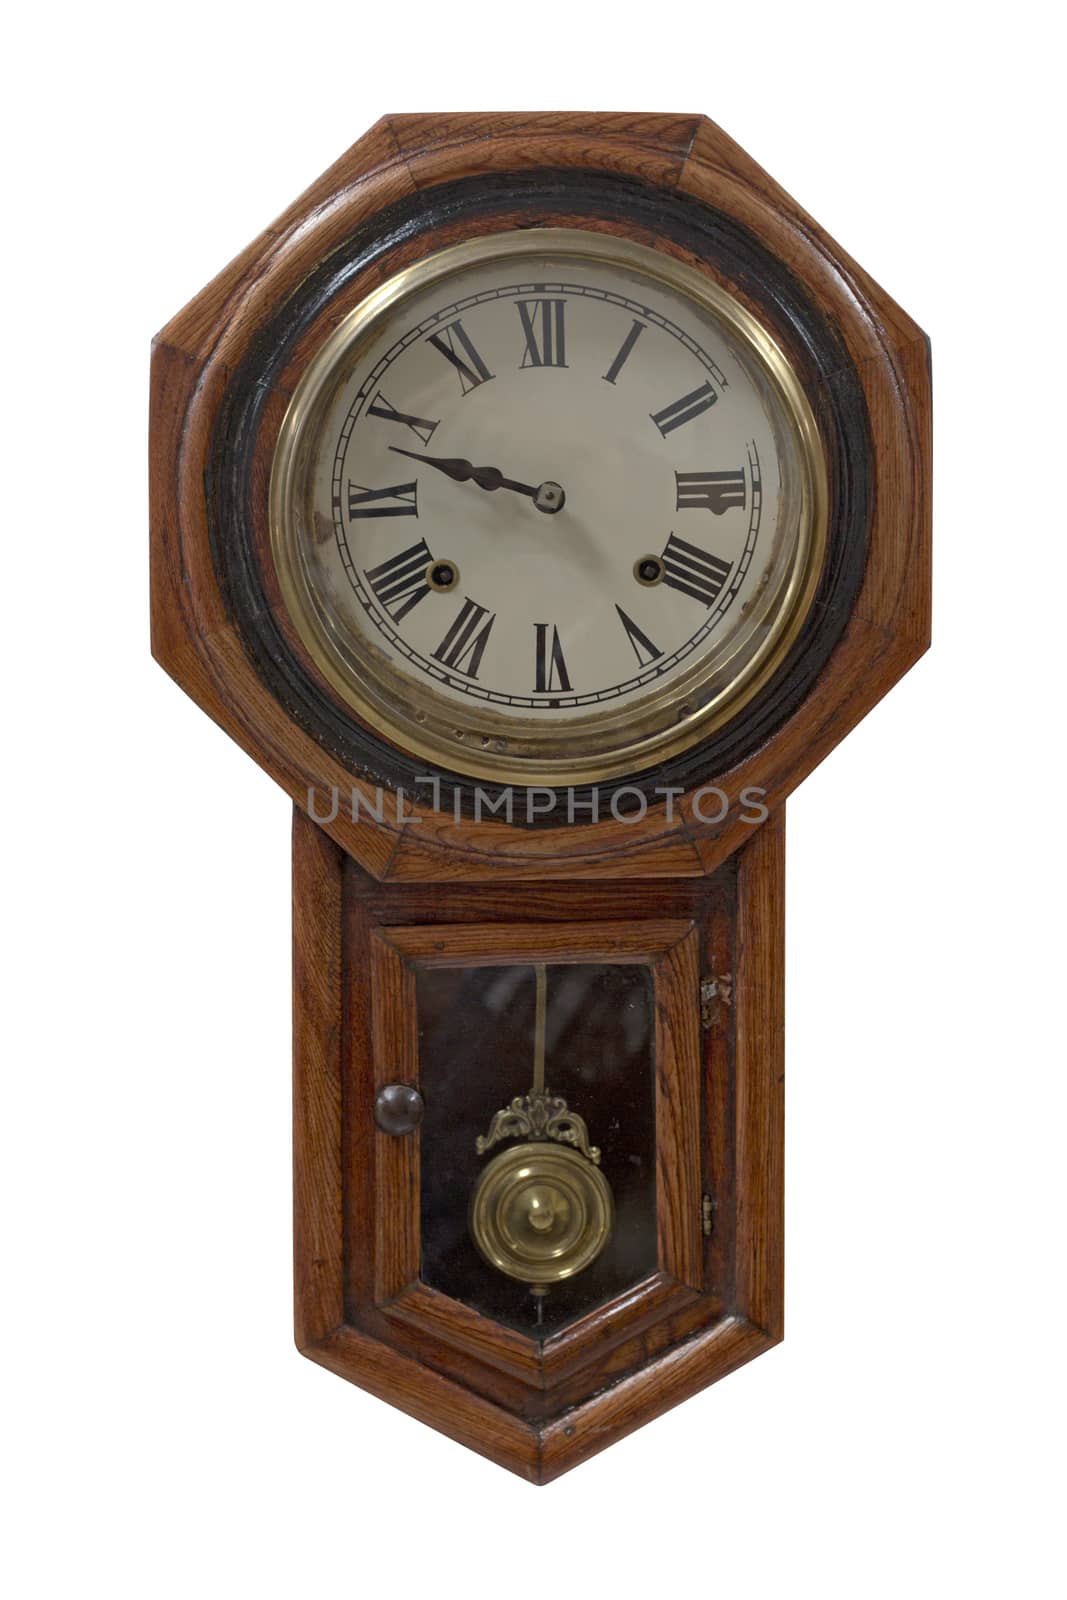 The Old clock wood isolated white background.